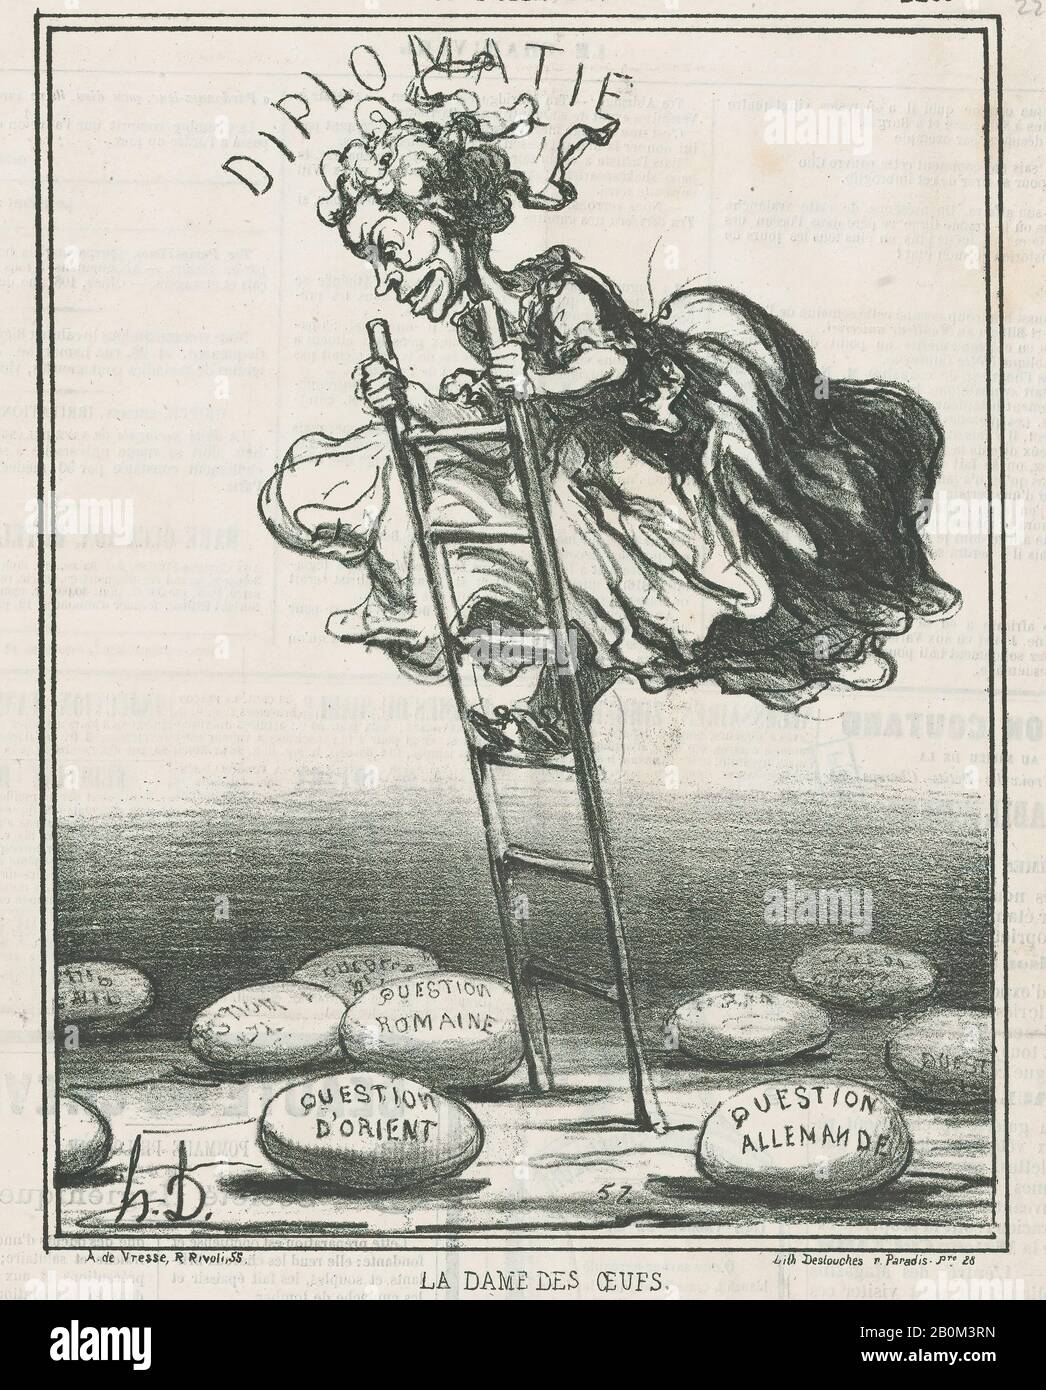 Honoré Daumier, The lady of the eggs: Watch out! It's important not to break any of them!, from 'News of the day,' published in Le Charivari, November 24, 1866, 'News of the day' (Actualités), Honoré Daumier (French, Marseilles 1808–1879 Valmondois), November 24, 1866, Lithograph on newsprint; second state of two (Delteil), Image: 9 5/8 × 7 1/2 in. (24.4 × 19 cm), Sheet: 11 5/16 × 11 1/2 in. (28.8 × 29.2 cm), Prints Stock Photo